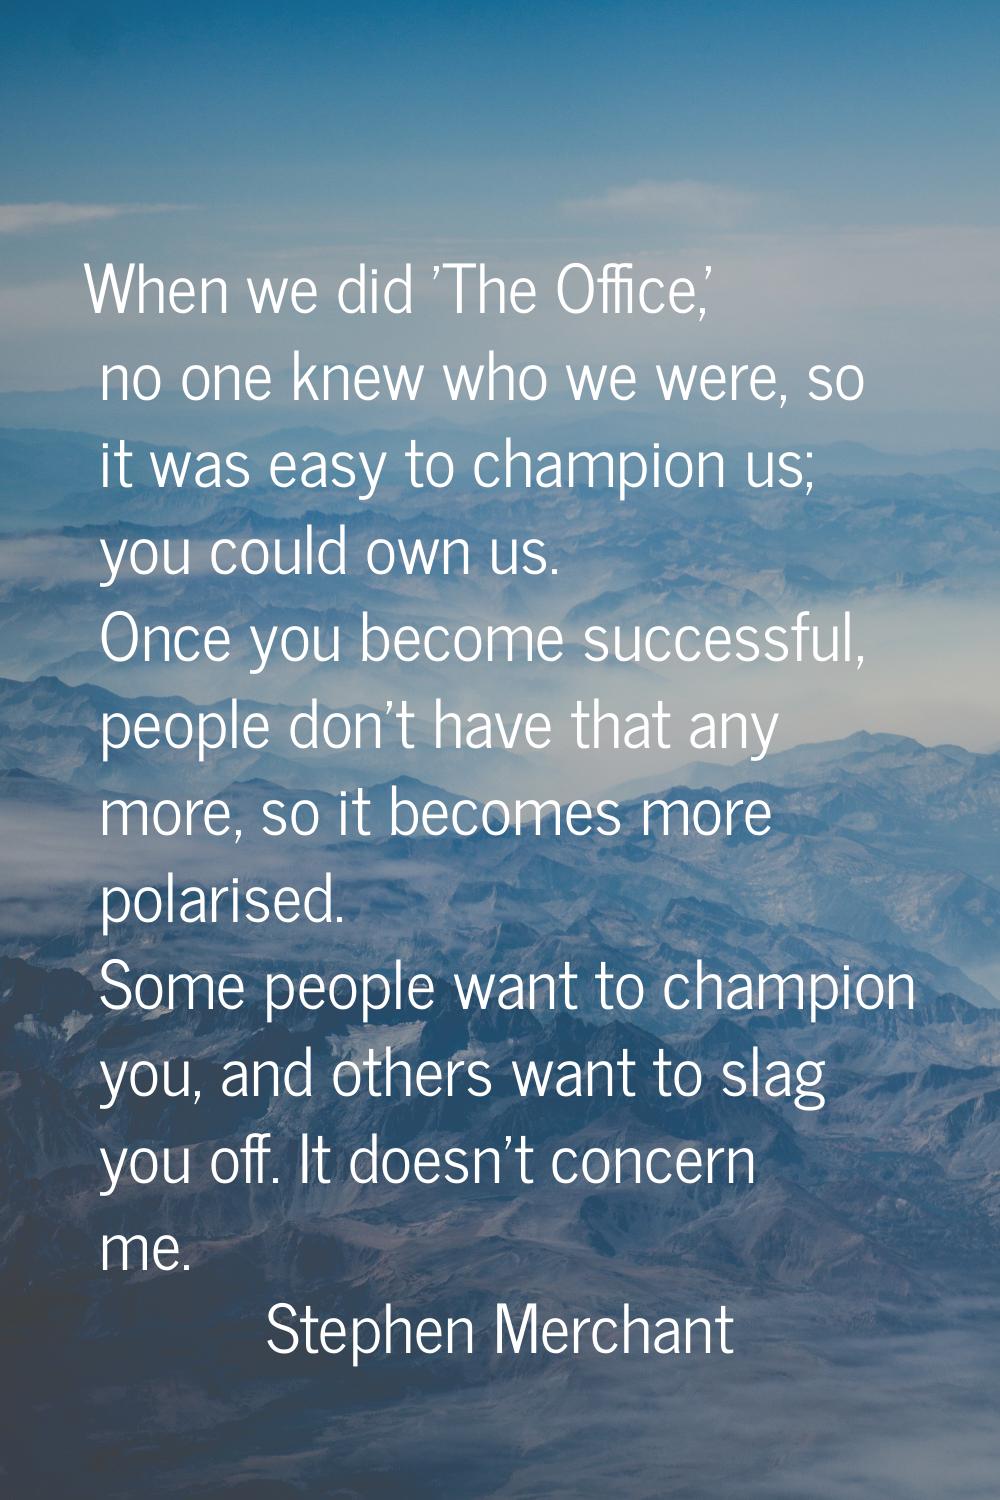 When we did 'The Office,' no one knew who we were, so it was easy to champion us; you could own us.